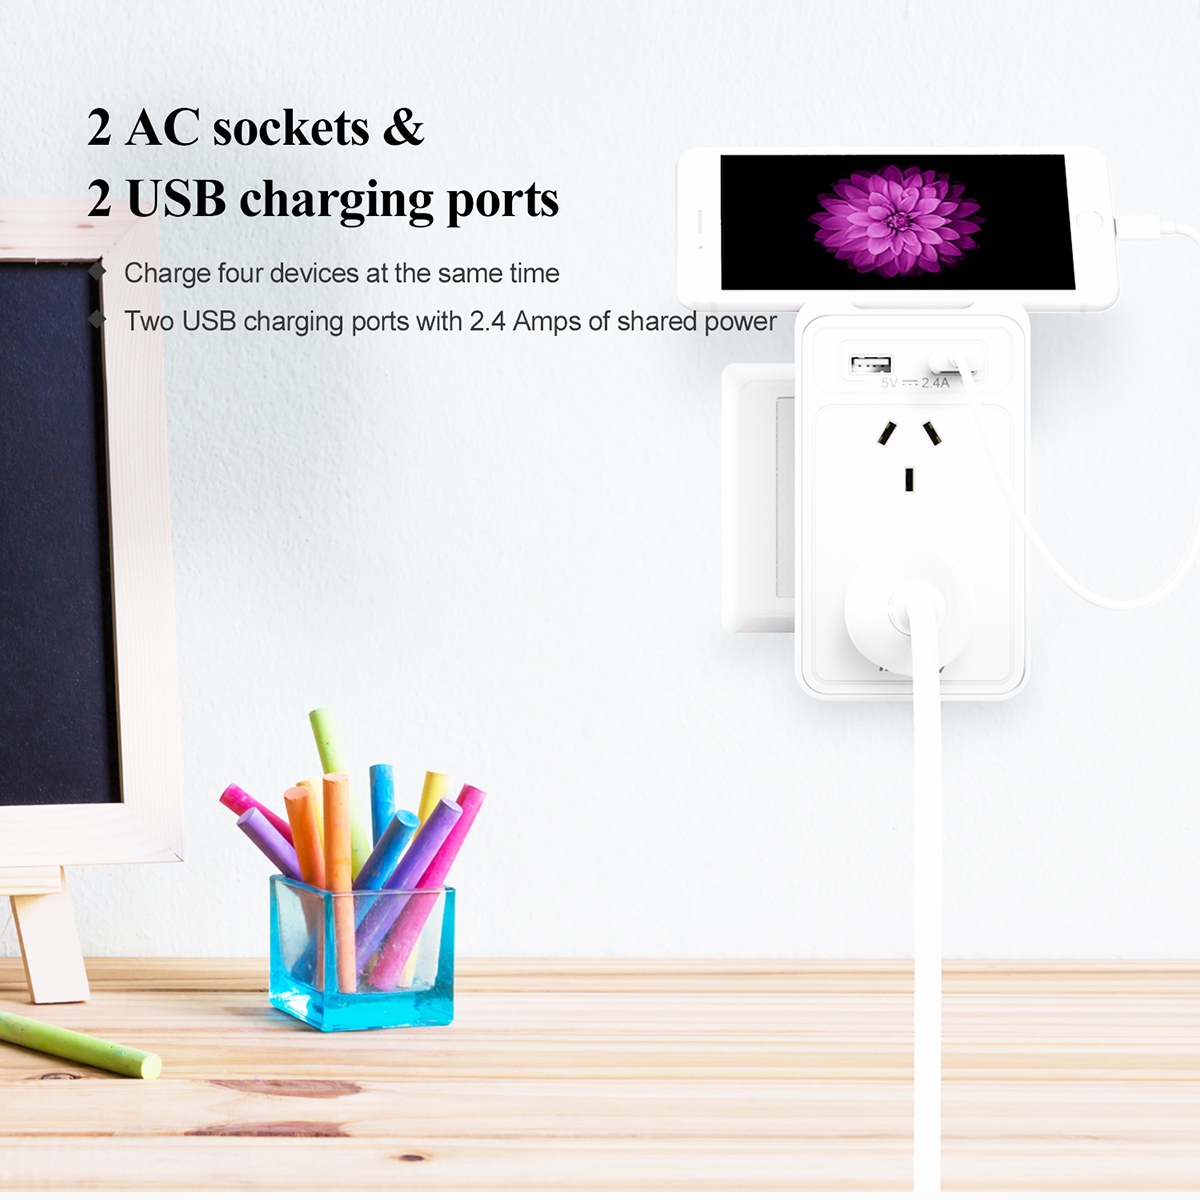 HUNTKEY SAC207 SMART WALL CHARGER with 2 AC and 2 USB combined 2.4A (TWIN PACK) 2